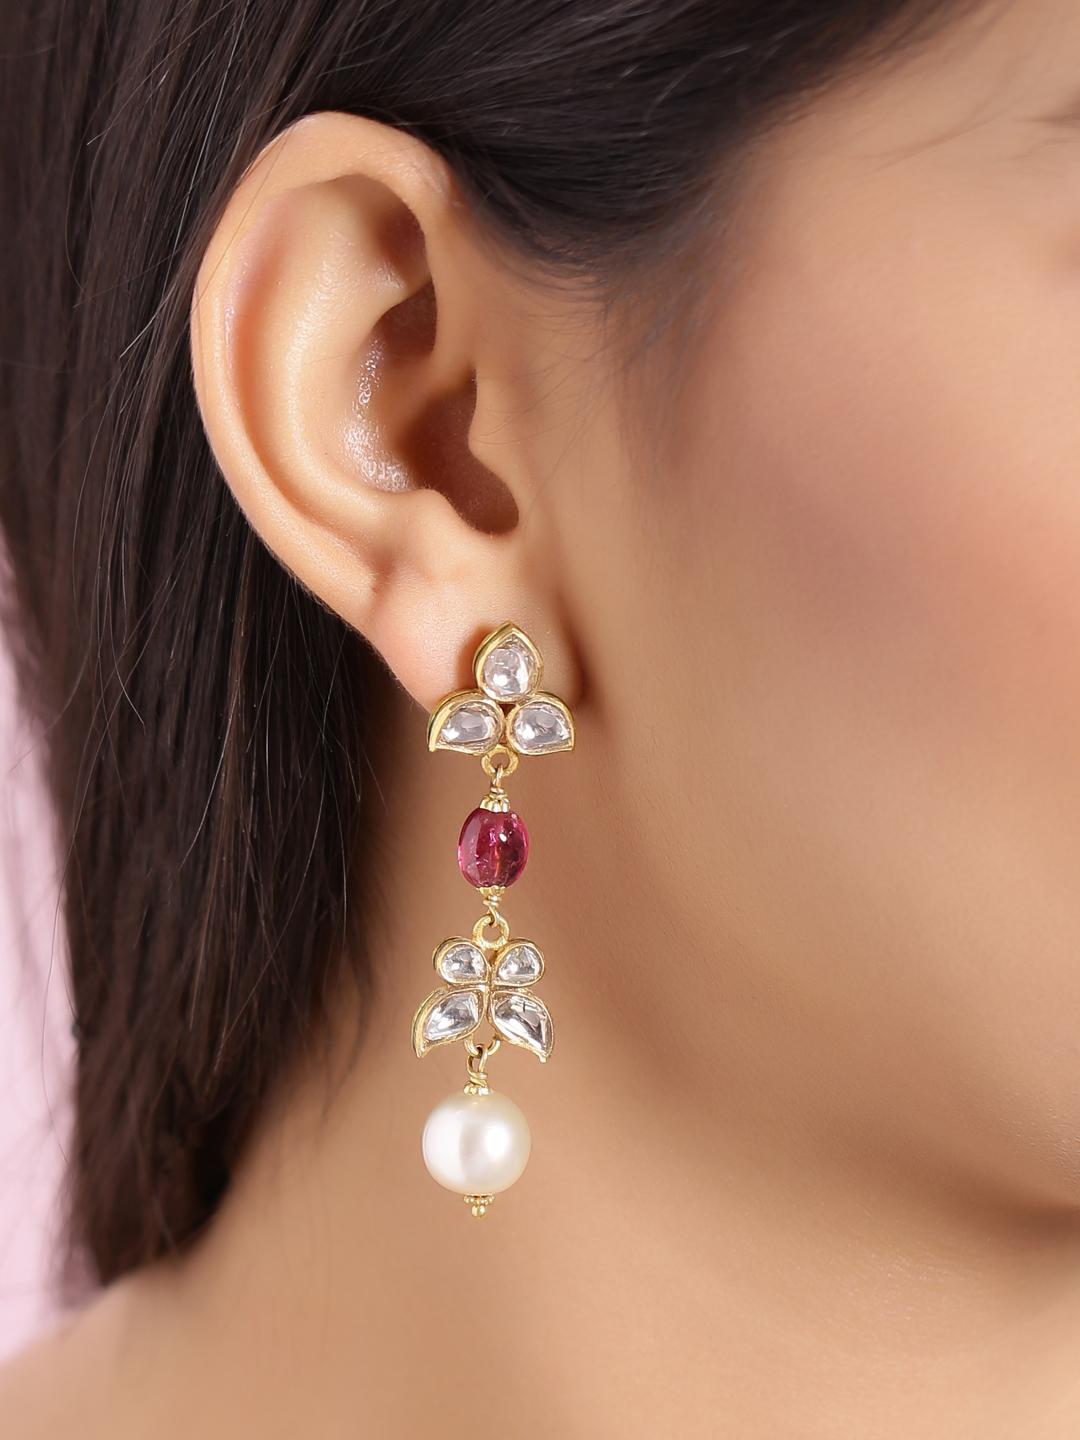 Uncut Diamond and Tourmaline earring pair handcrafted in 18K Gold with fine enamel For Sale